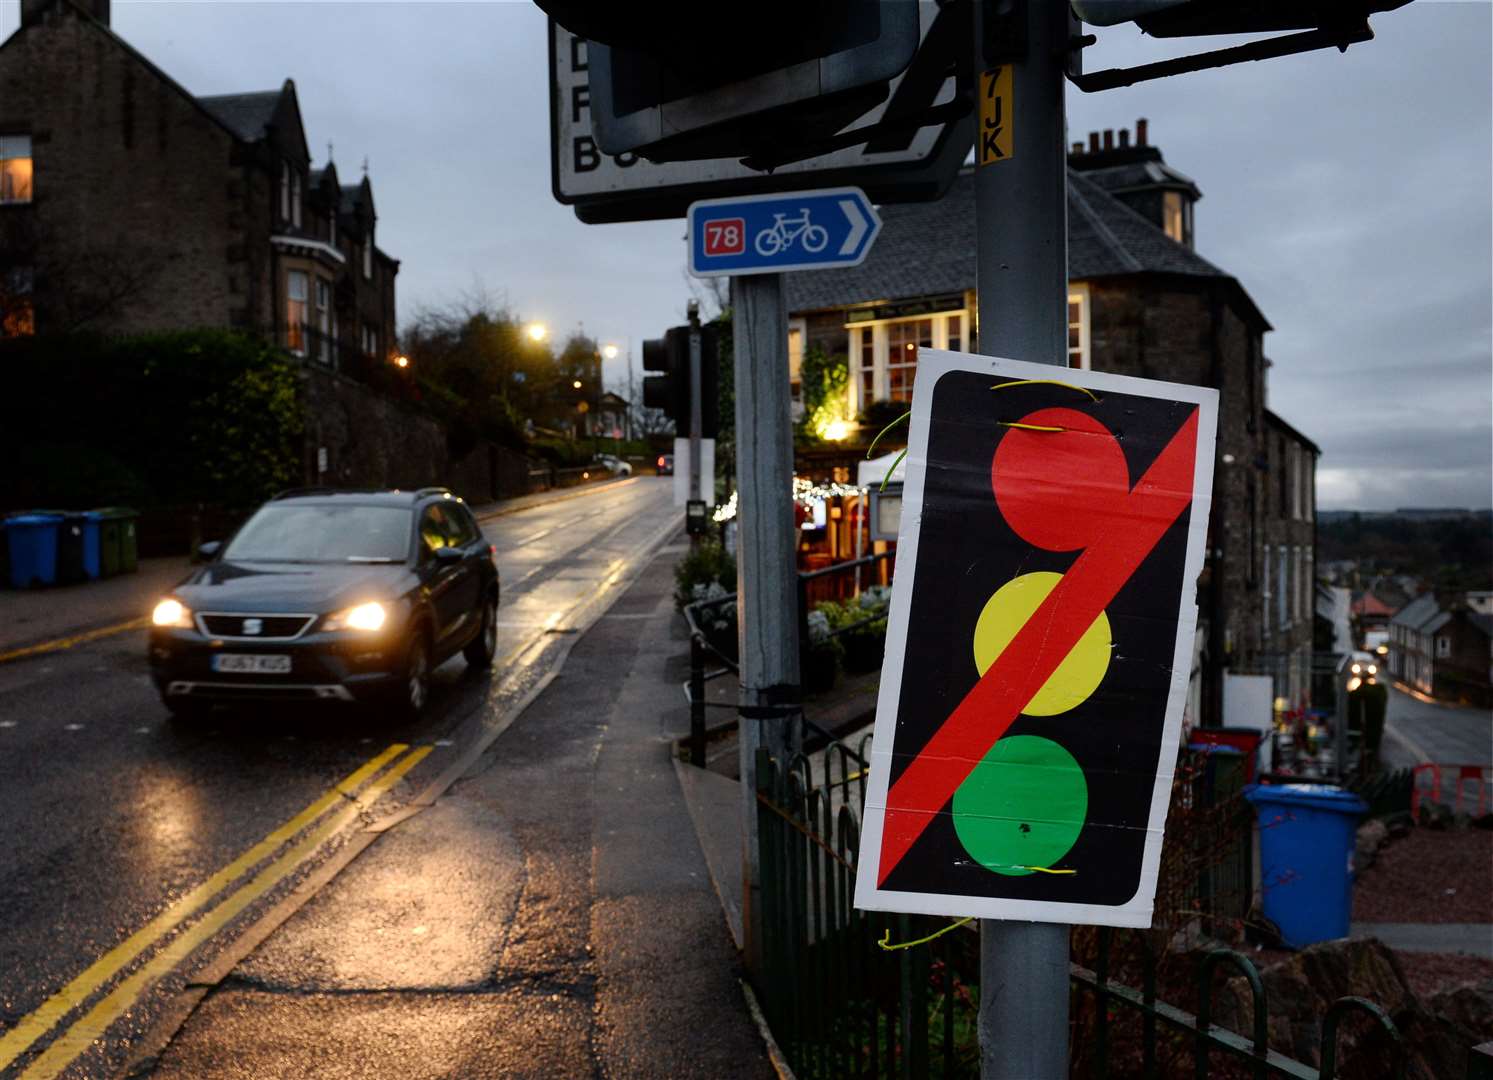 Traffic lights have been broken in Castle Street for at least two weeks.